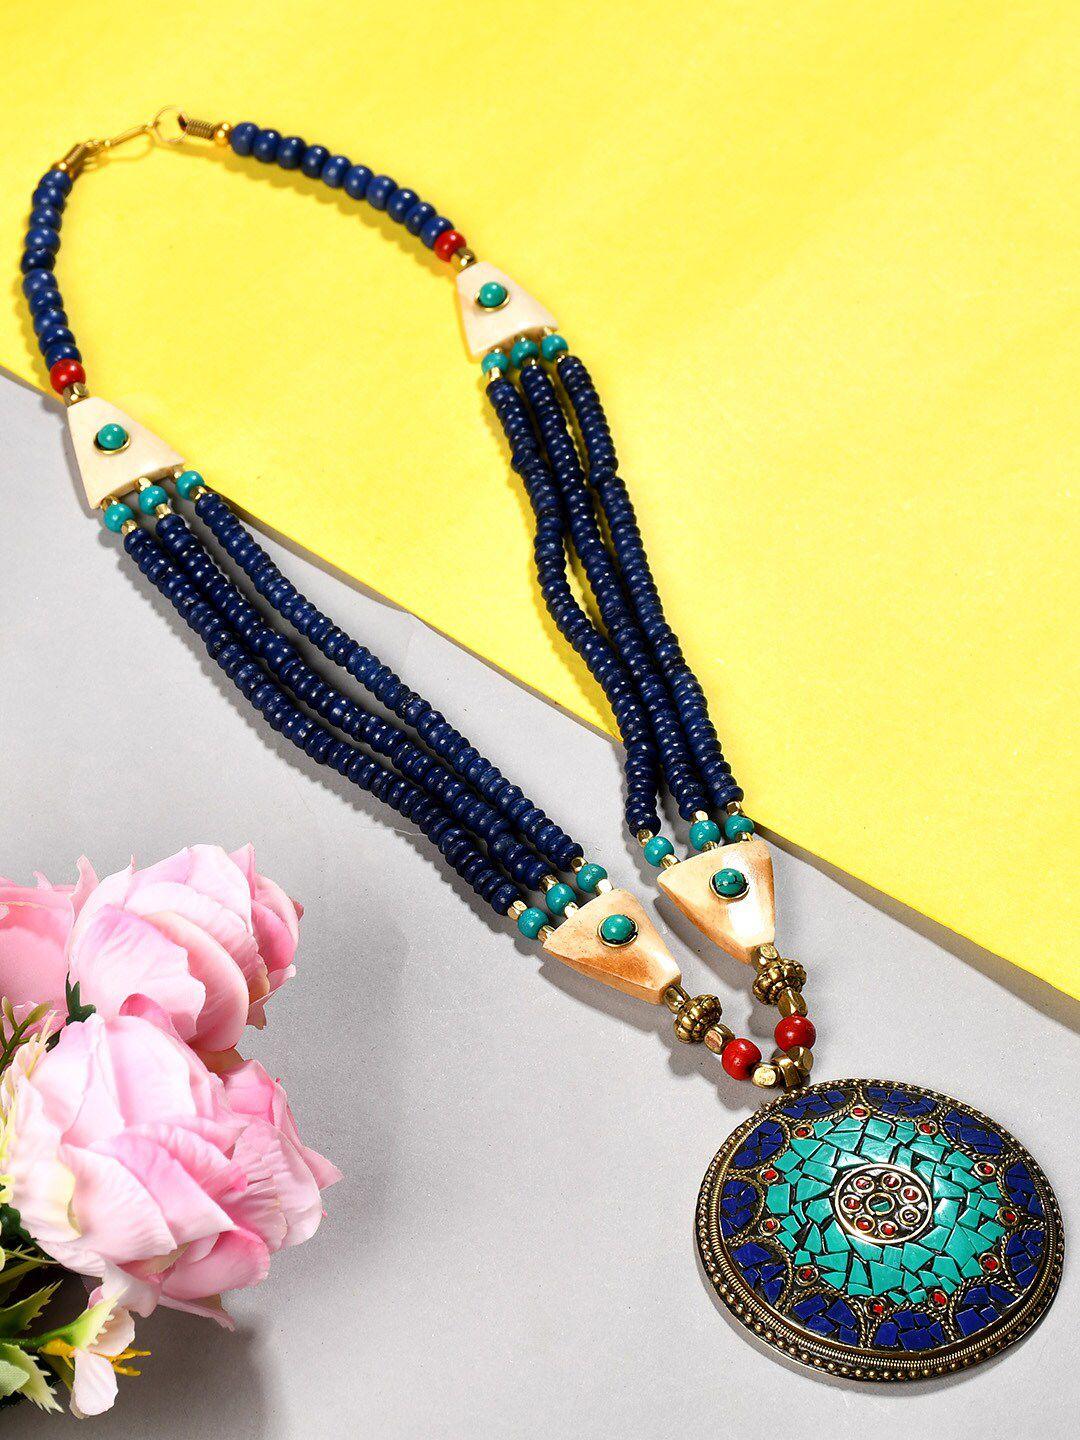 bamboo-tree-jewels-black-&-blue-afghan-necklace